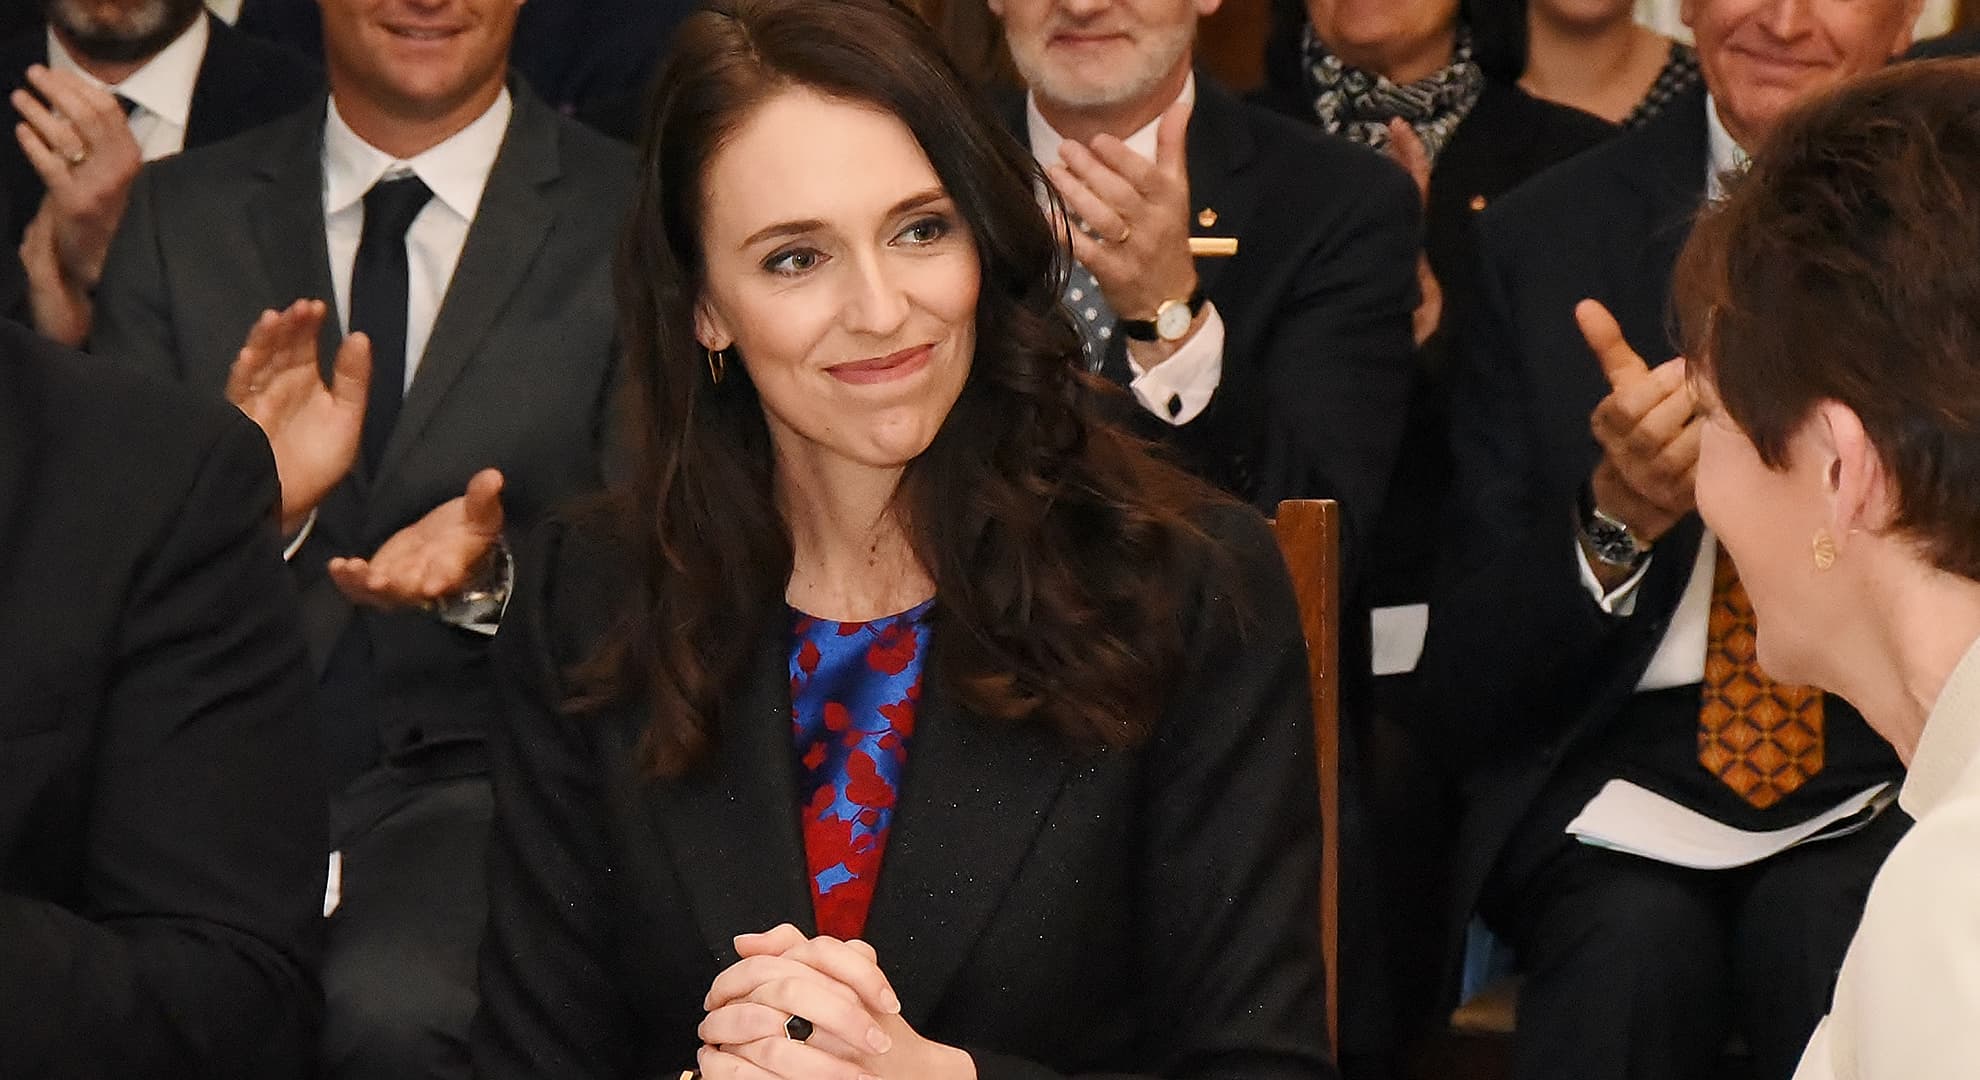 Jacinda Ardern sitting at table surrounded by applauding people as she is sworn in as New Zealand Prime Minister.